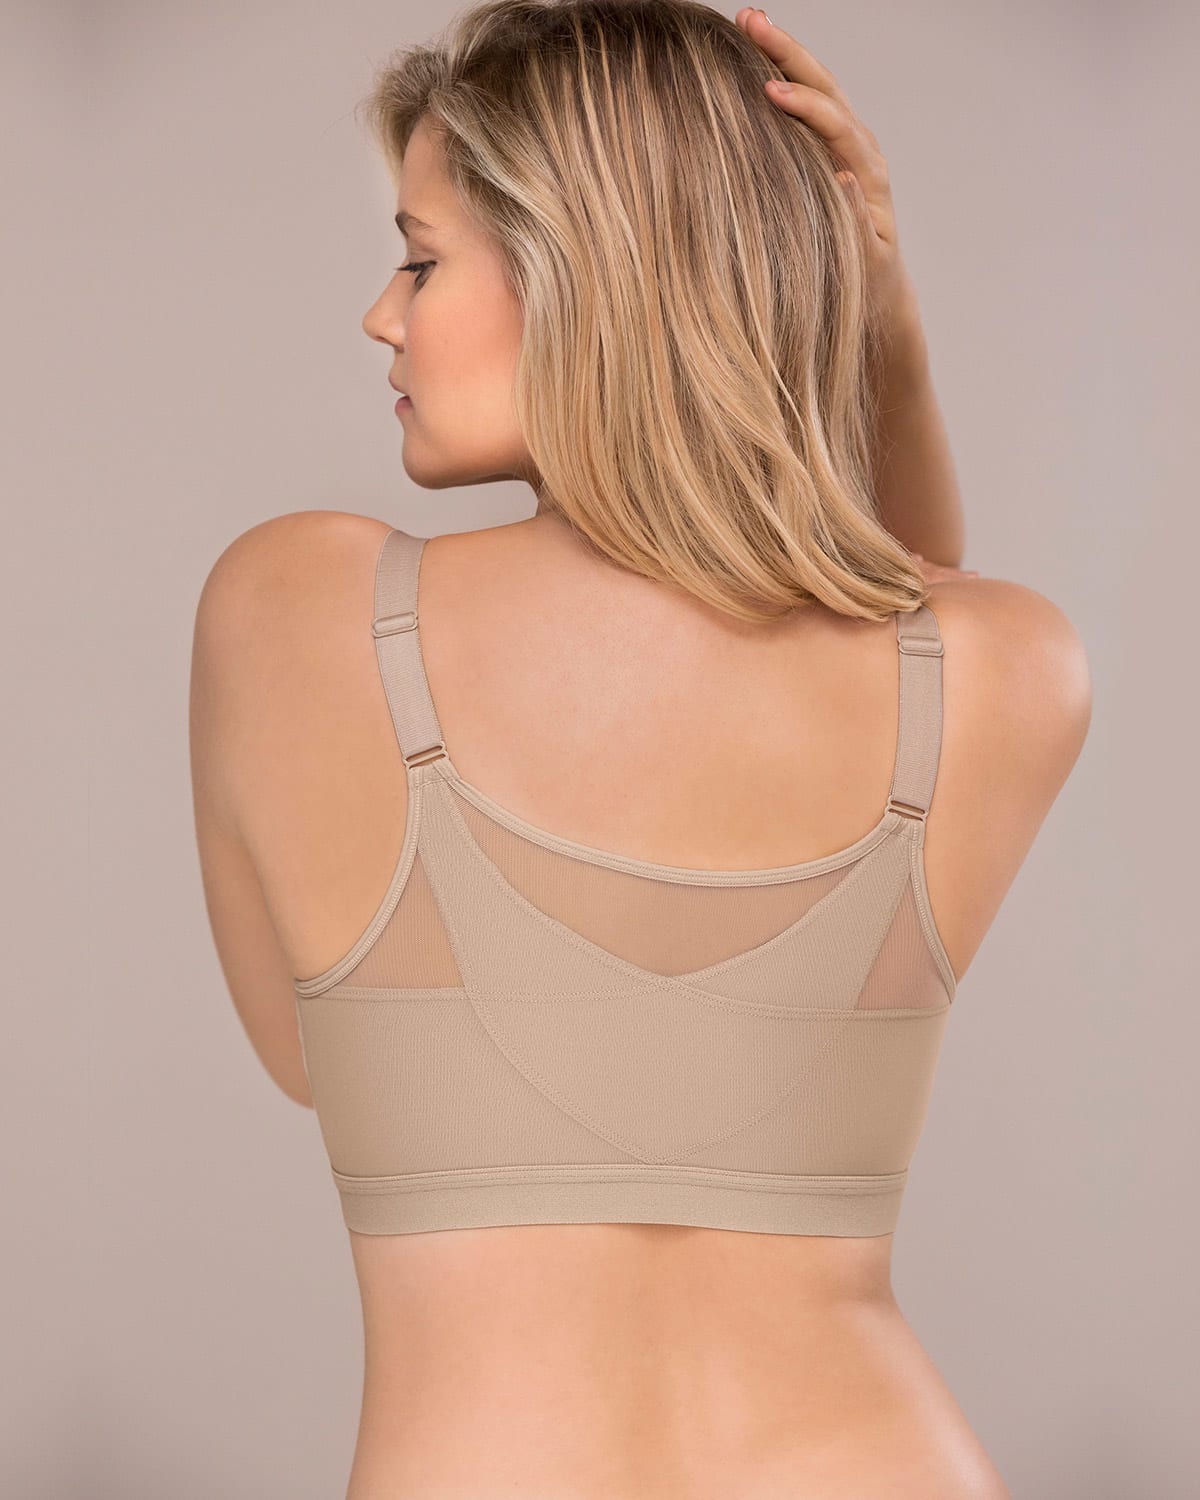 Zip Front Closure Surgical Sports Bra, Post Breast Surgery